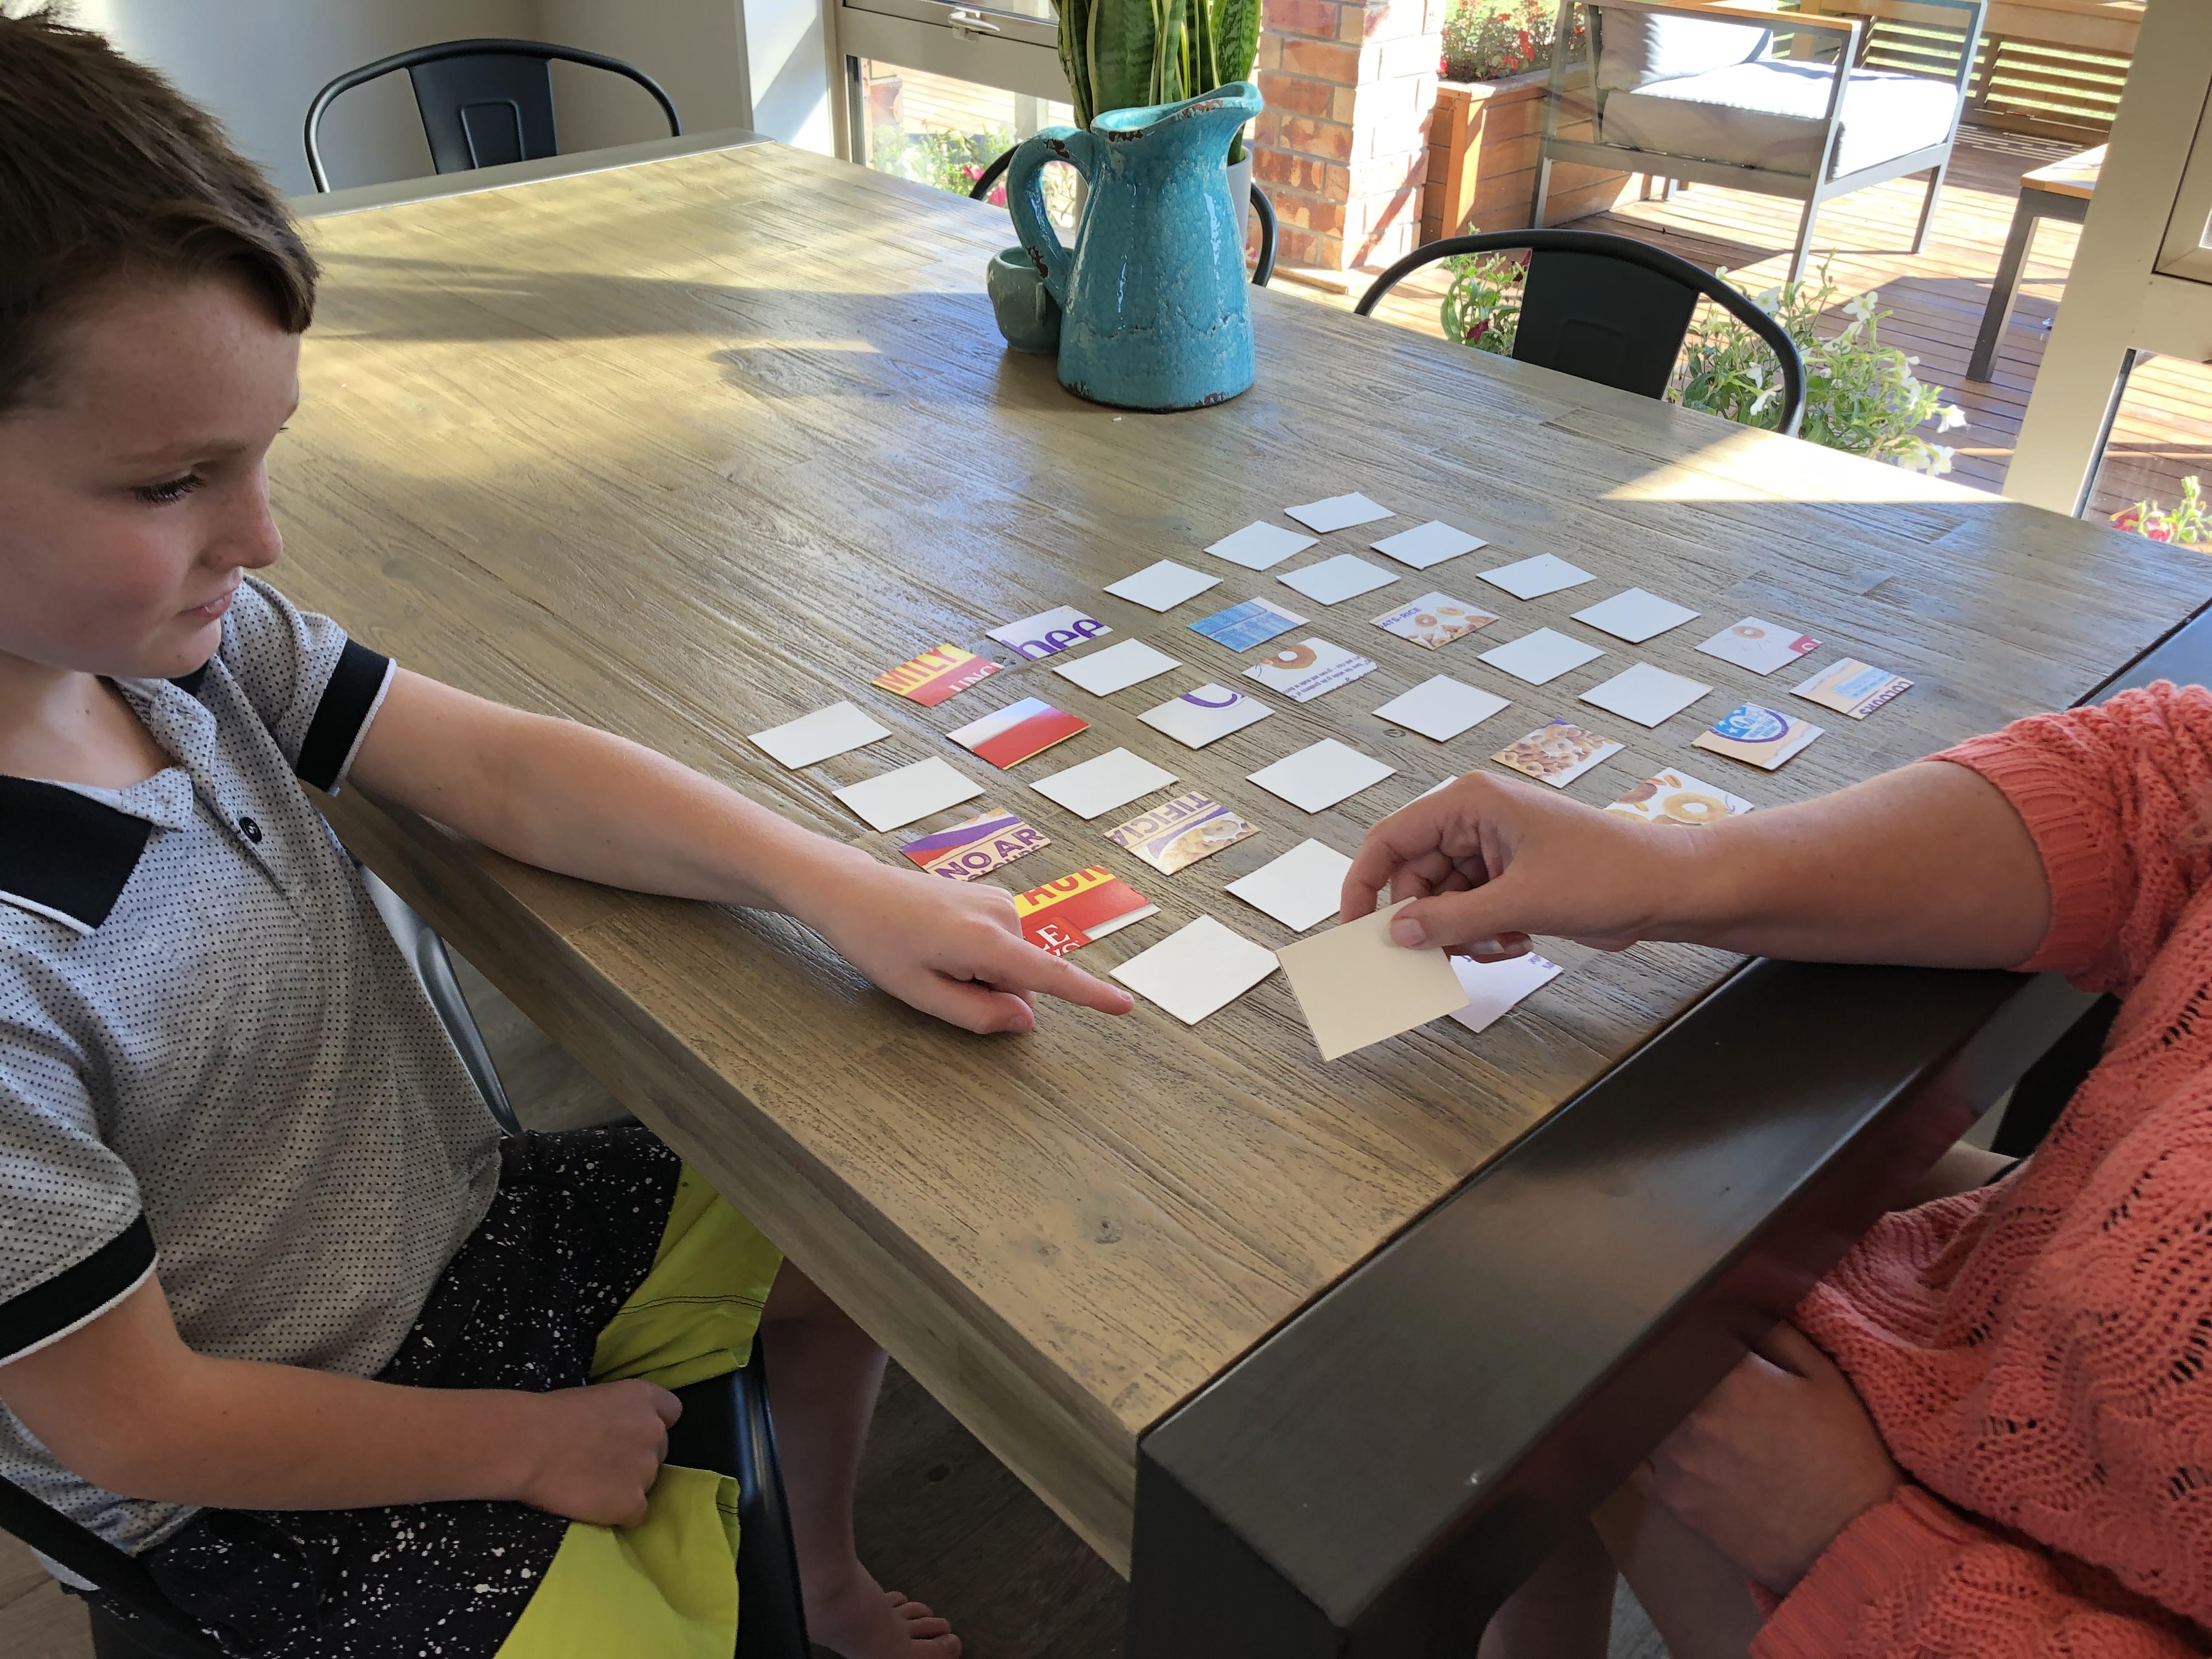 Adult adding another row and column of cards to the grid.